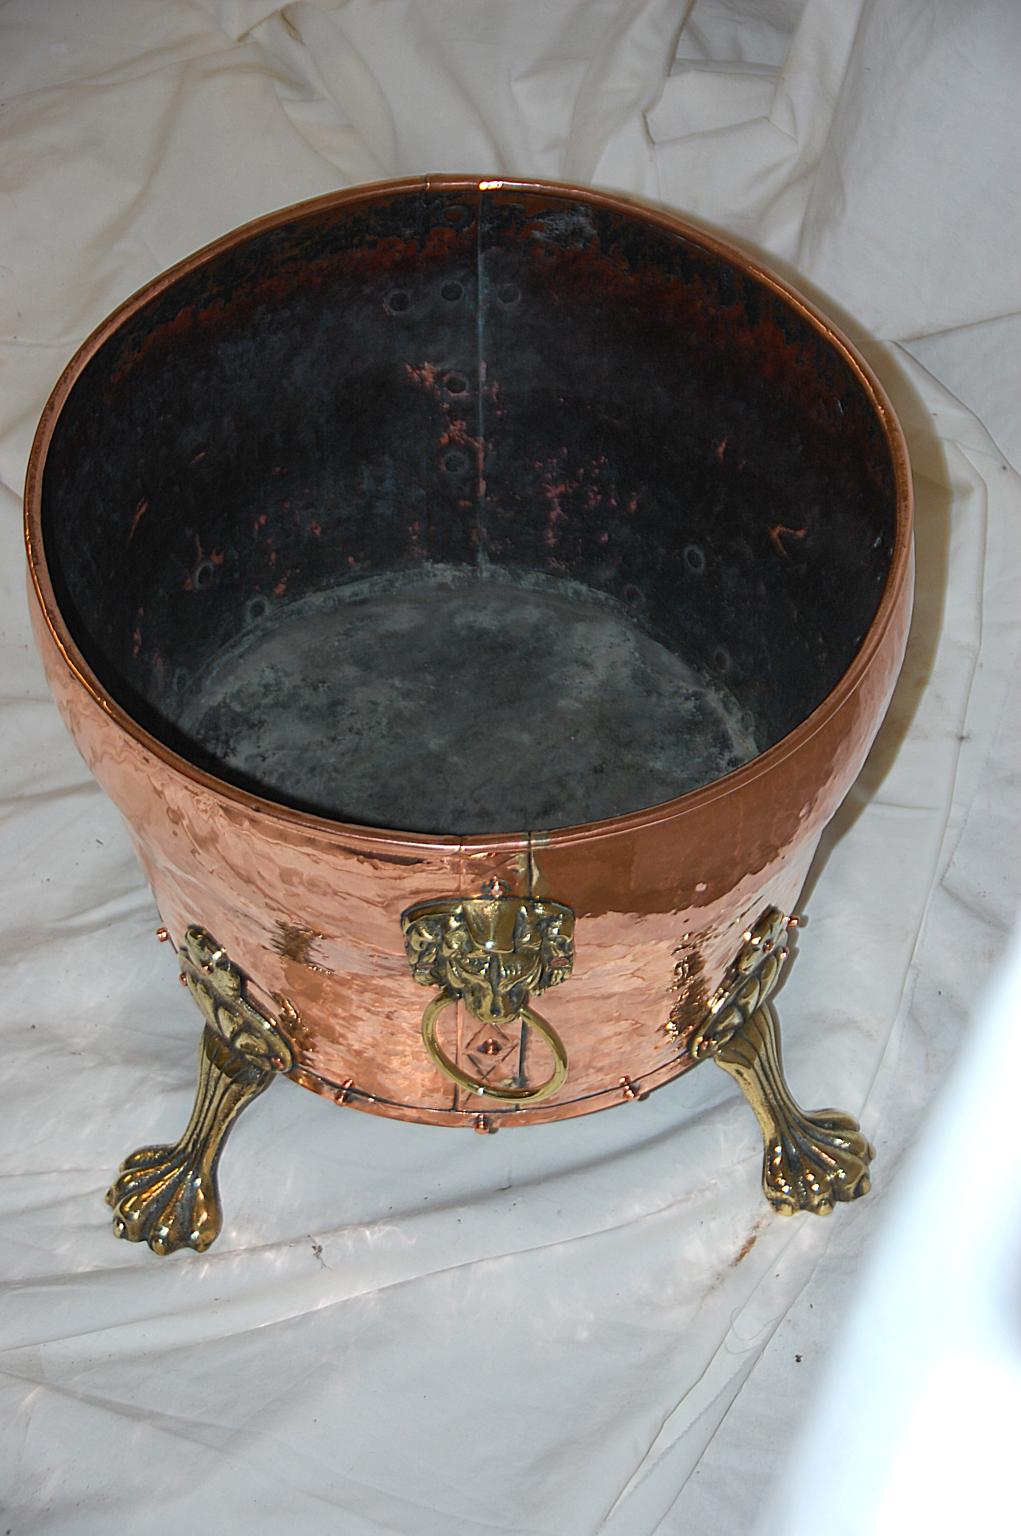 English mid 19th century oval copper coal bin with cast brass paw feet and lion headed side handles. This shaped oval coal bin is made with riveted construction techniques, is of quite heavy quality and would make among other things a good log bin,